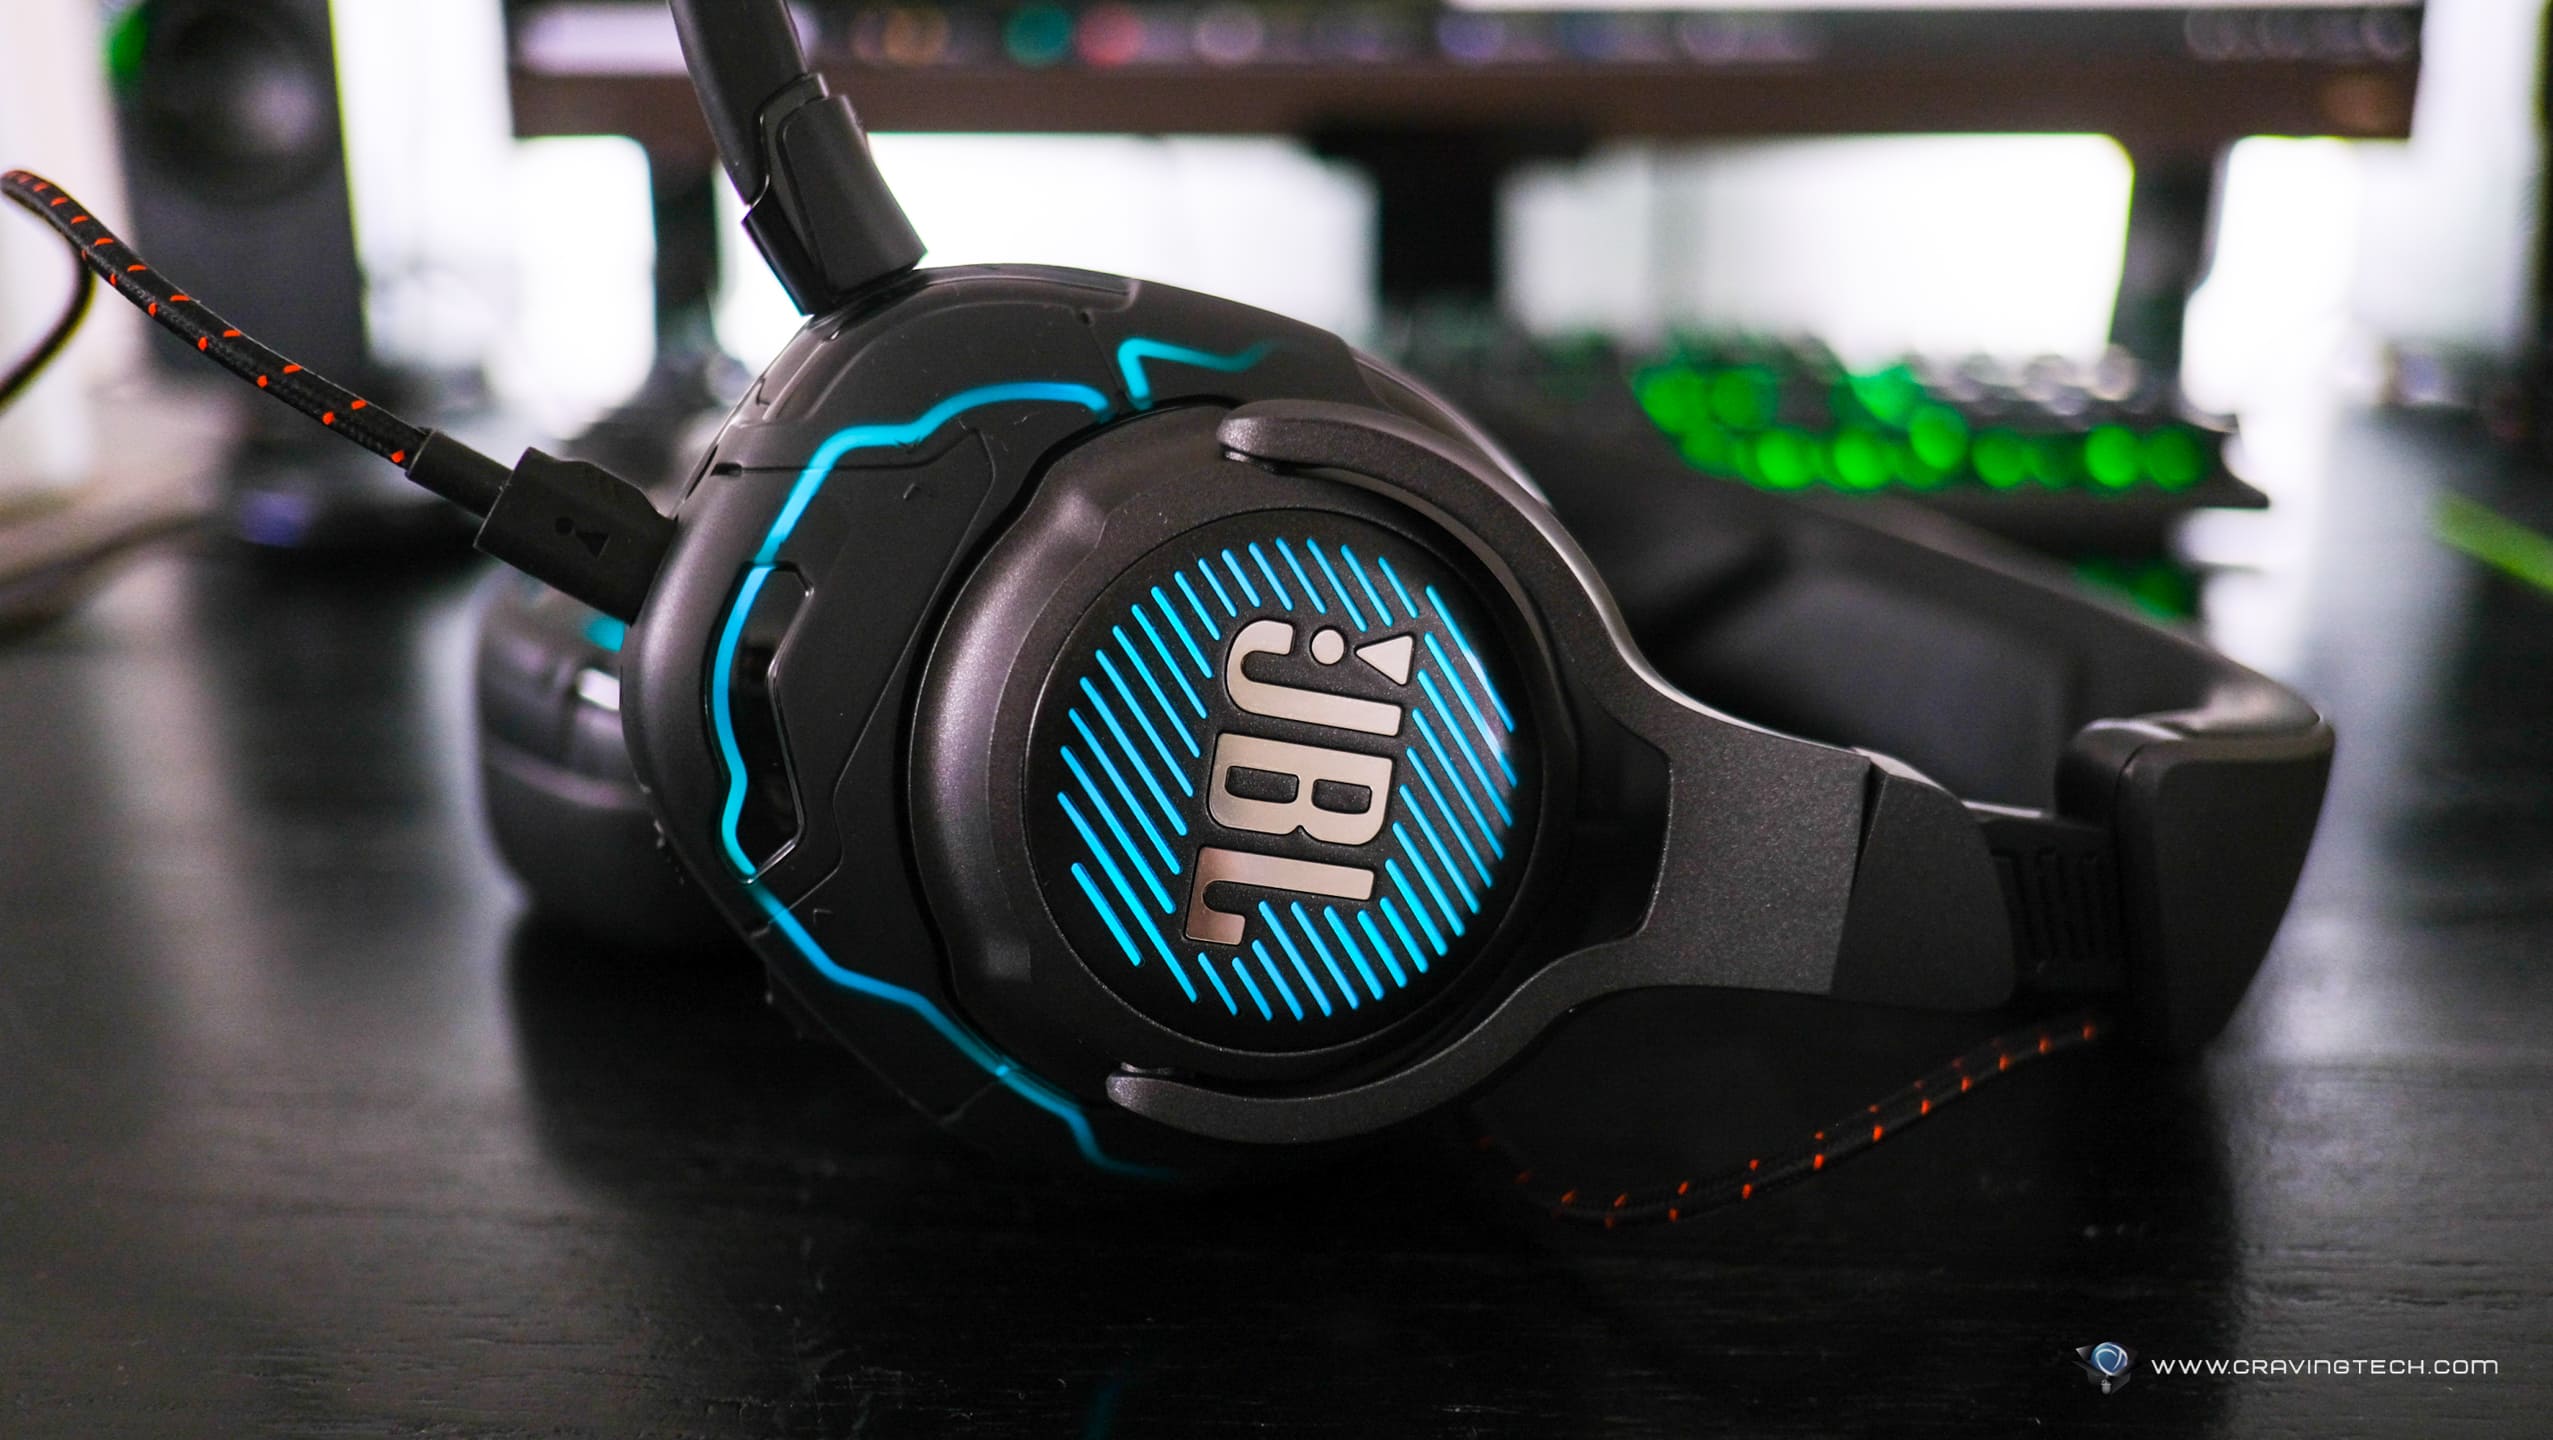 Premium gaming headset with Active Noise Cancelling - JBL Quantum 